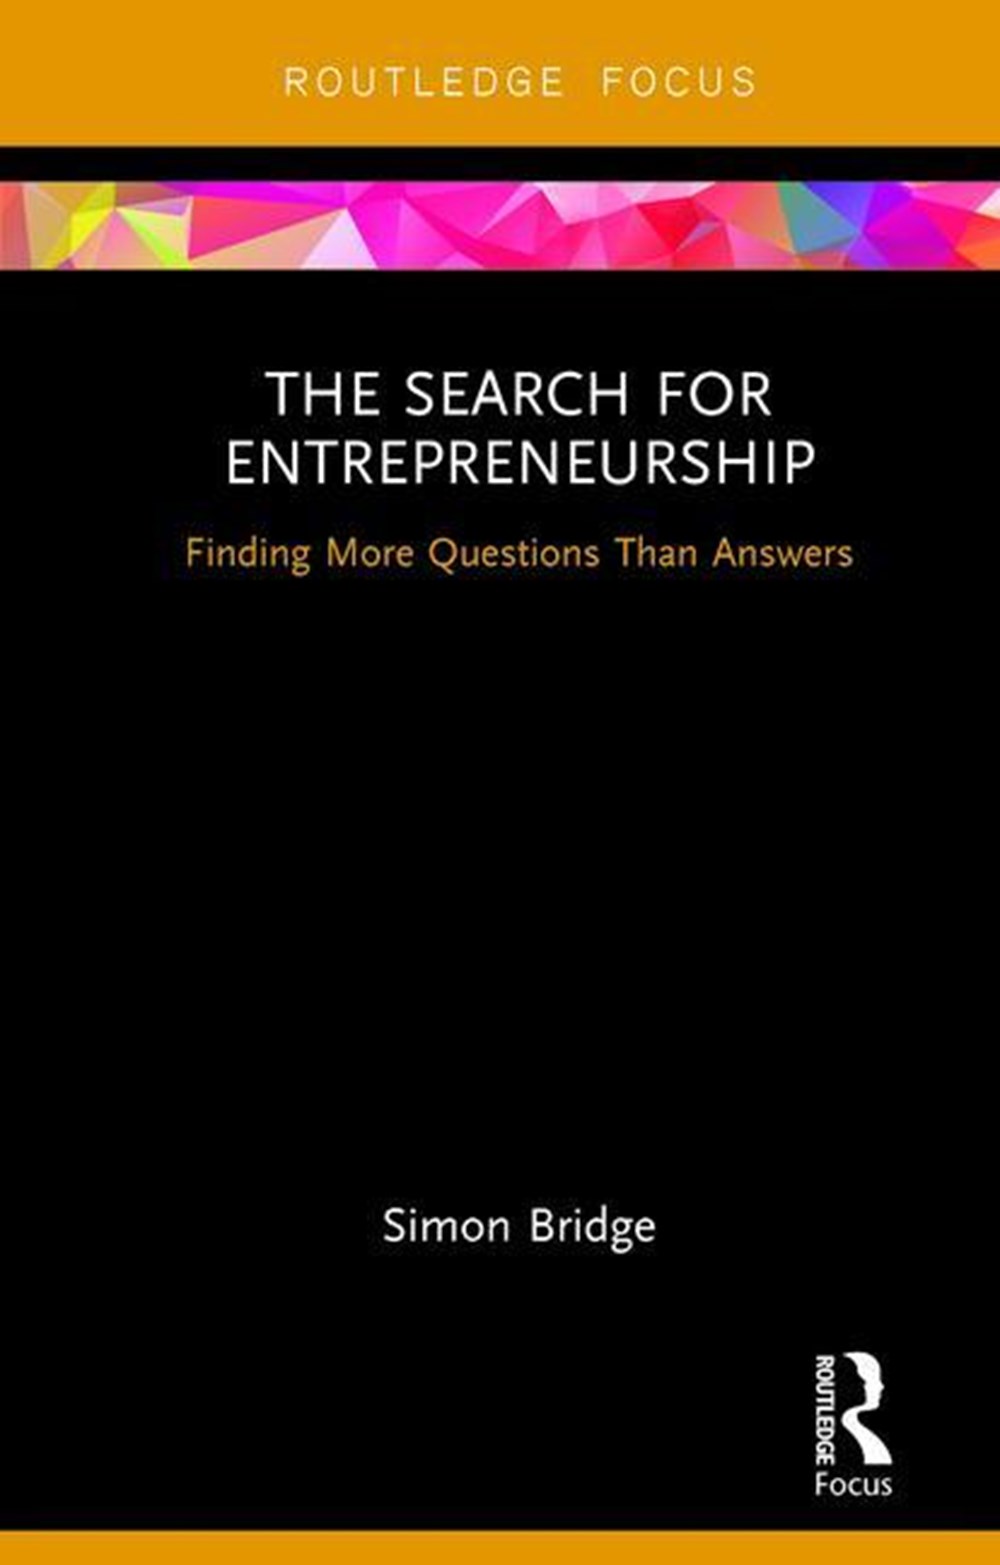 Search for Entrepreneurship: Finding More Questions Than Answers